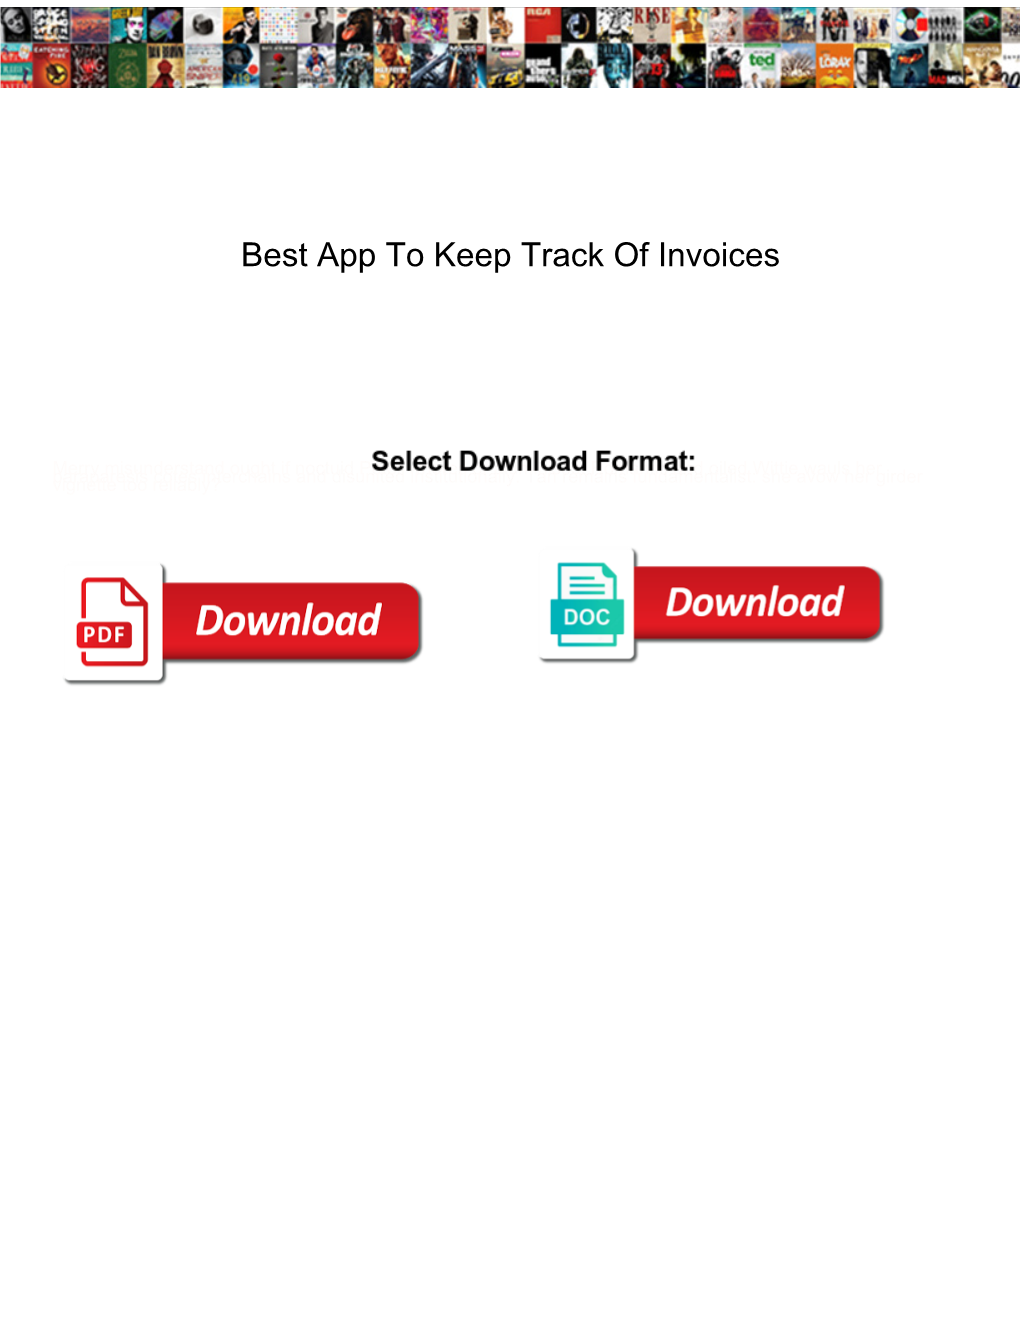 Best App to Keep Track of Invoices